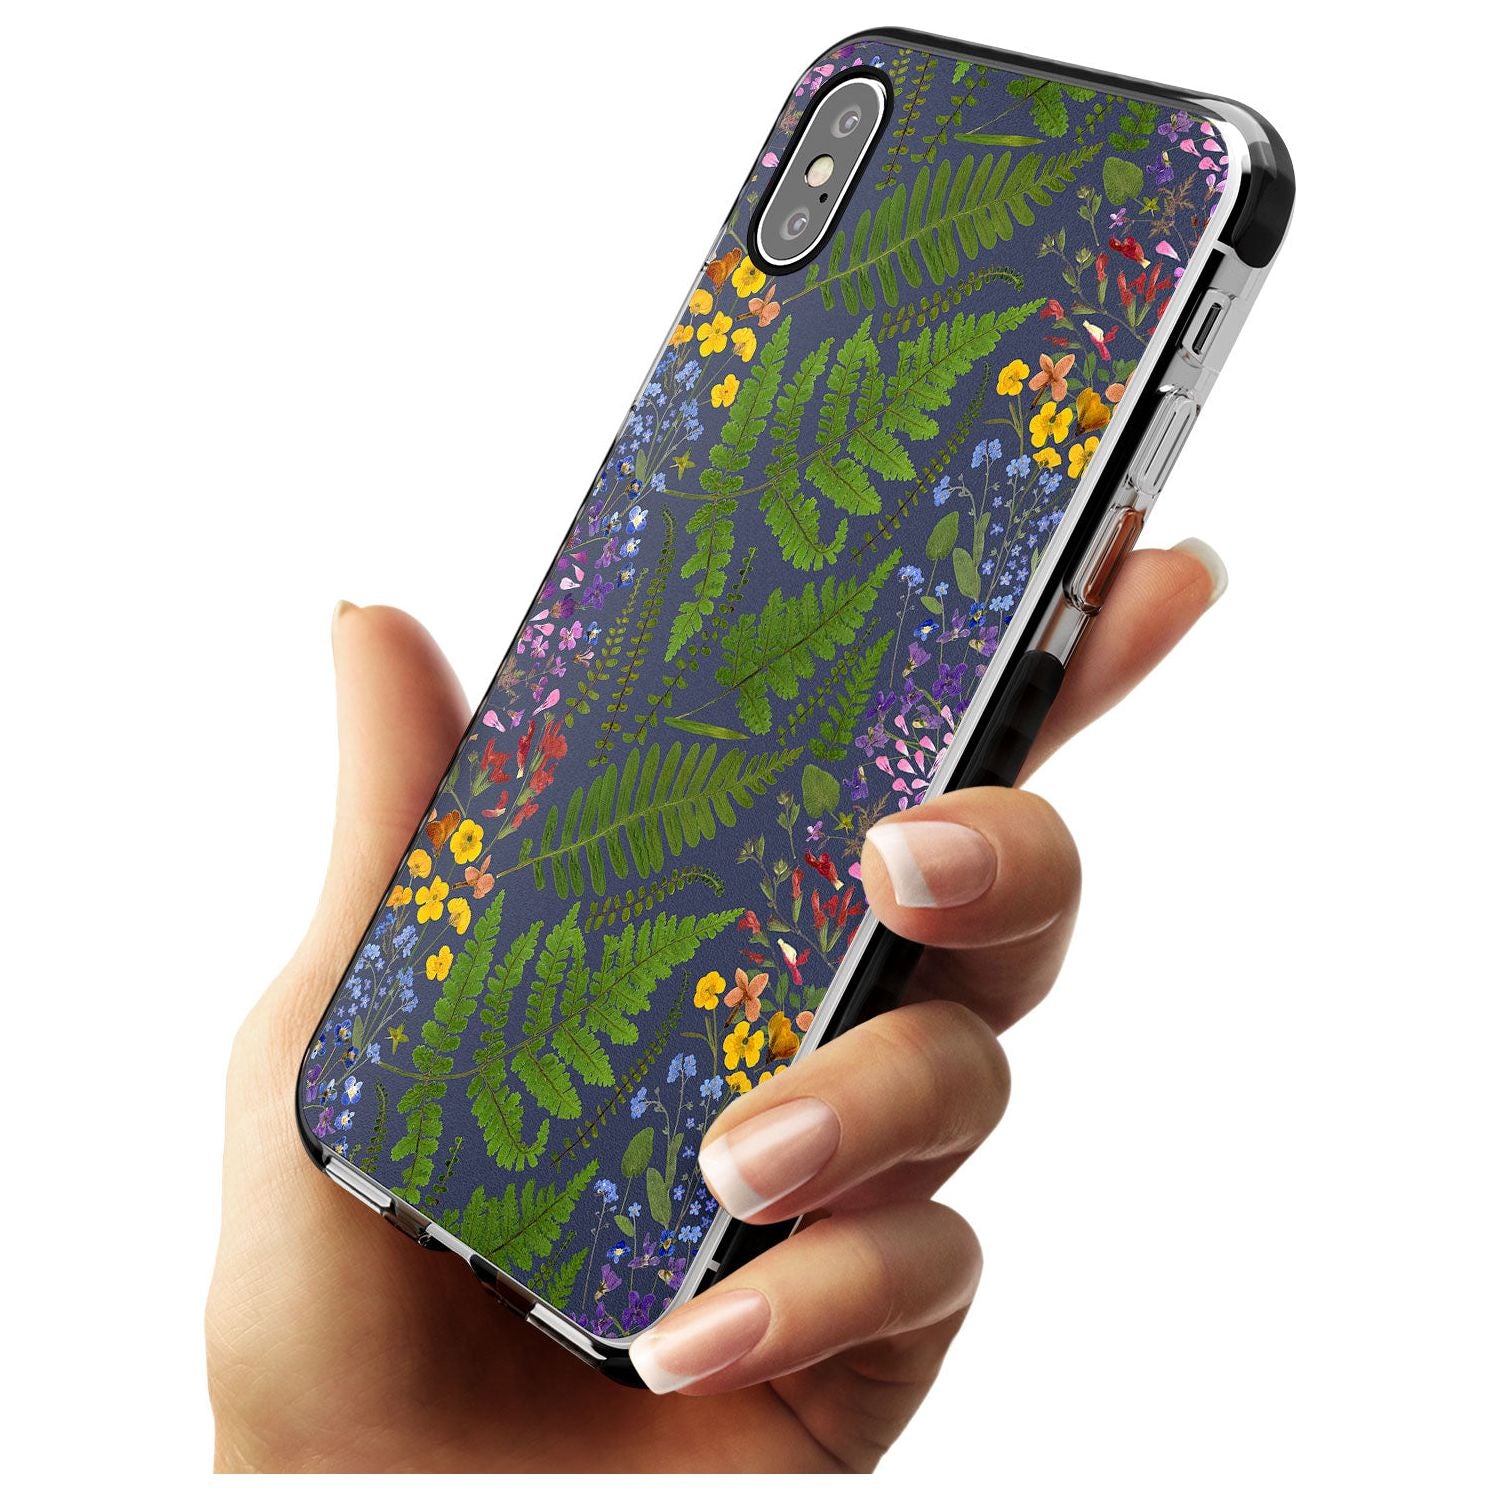 Busy Floral and Fern Design - Navy Black Impact Phone Case for iPhone X XS Max XR